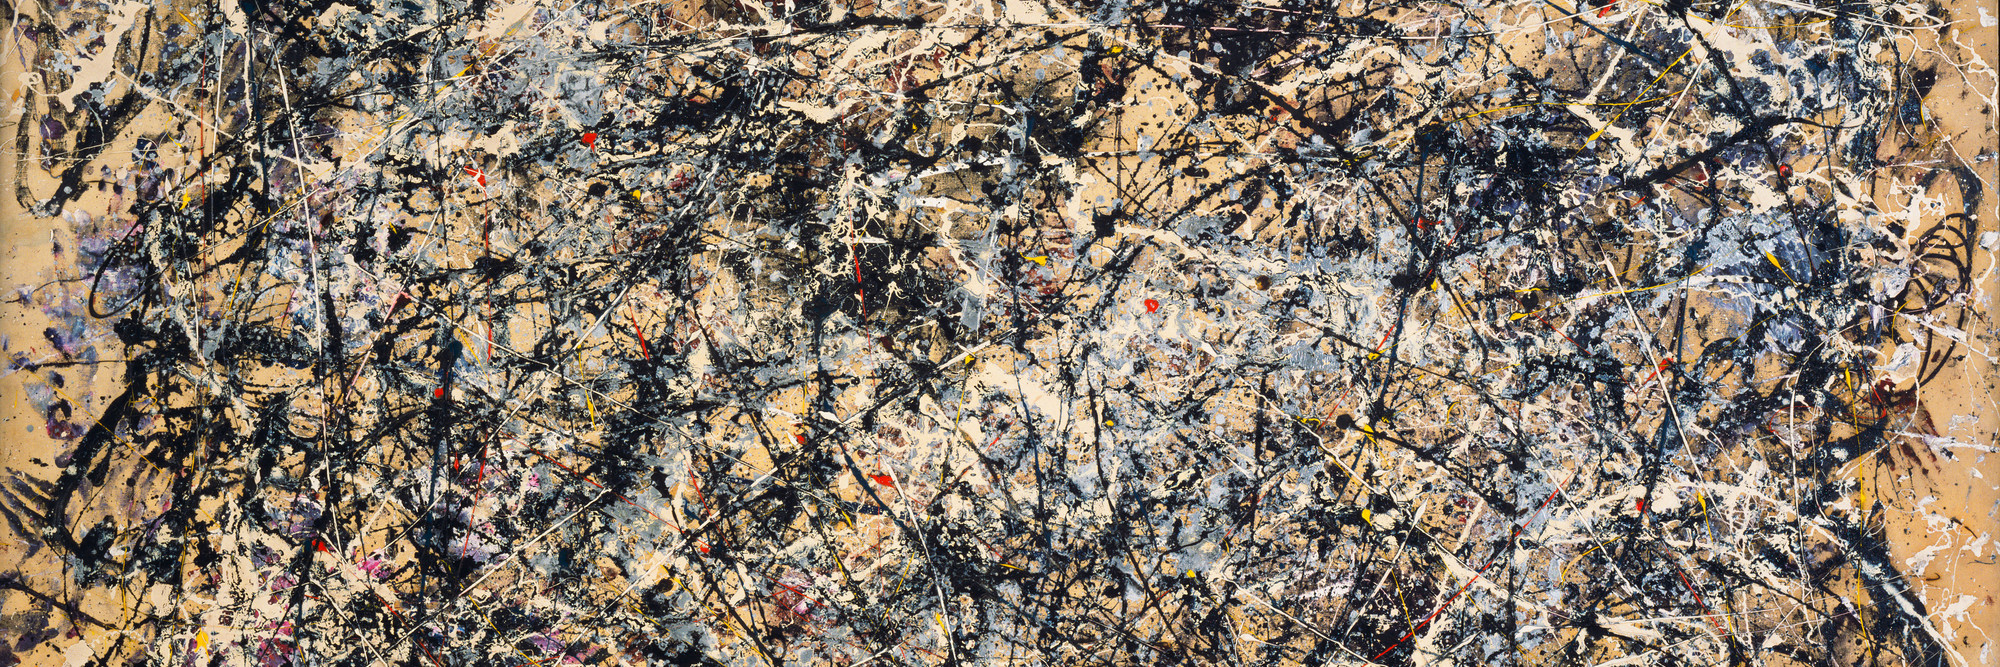 Jackson Pollock. Number 1A, 1948. 1948. Oil and enamel paint on canvas, 68″ × 8′ 8″ (172.7 × 264.2 cm). Purchase. © 2010 Pollock-Krasner Foundation / Artists Rights Society (ARS), New York